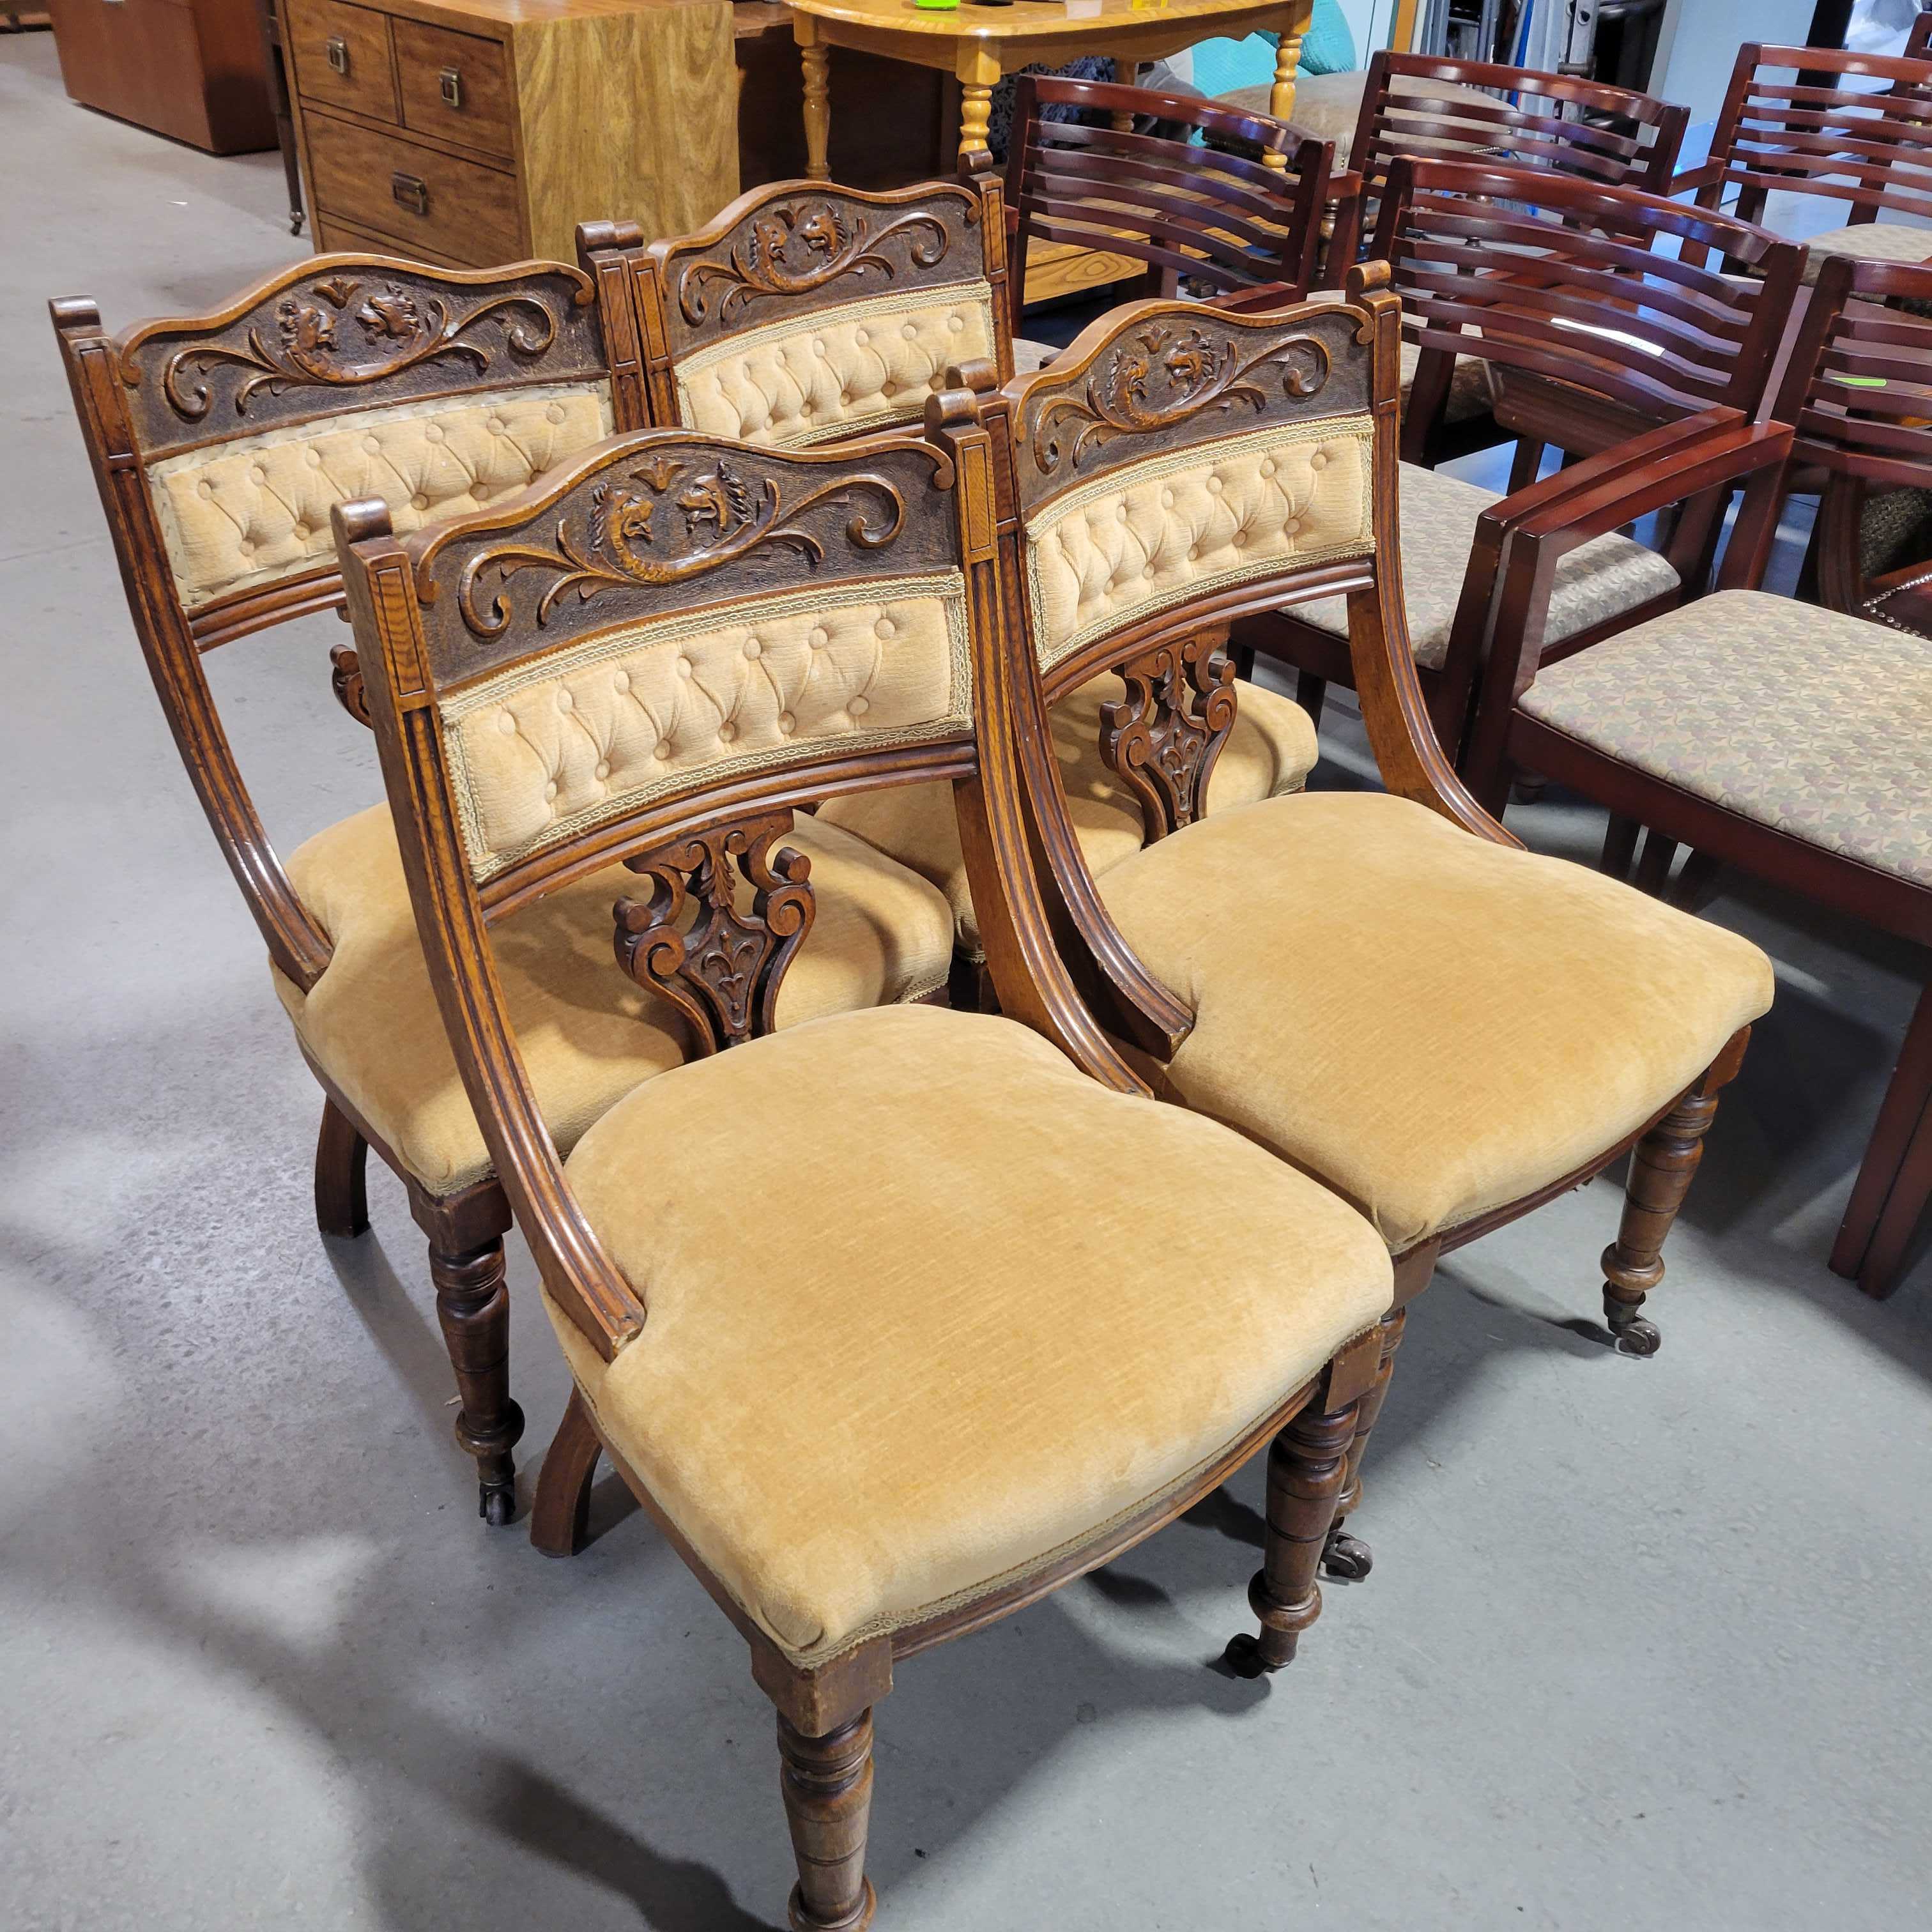 Set of 4 Antique Ornate Carved Wood and Gold Velvet Dining Chairs